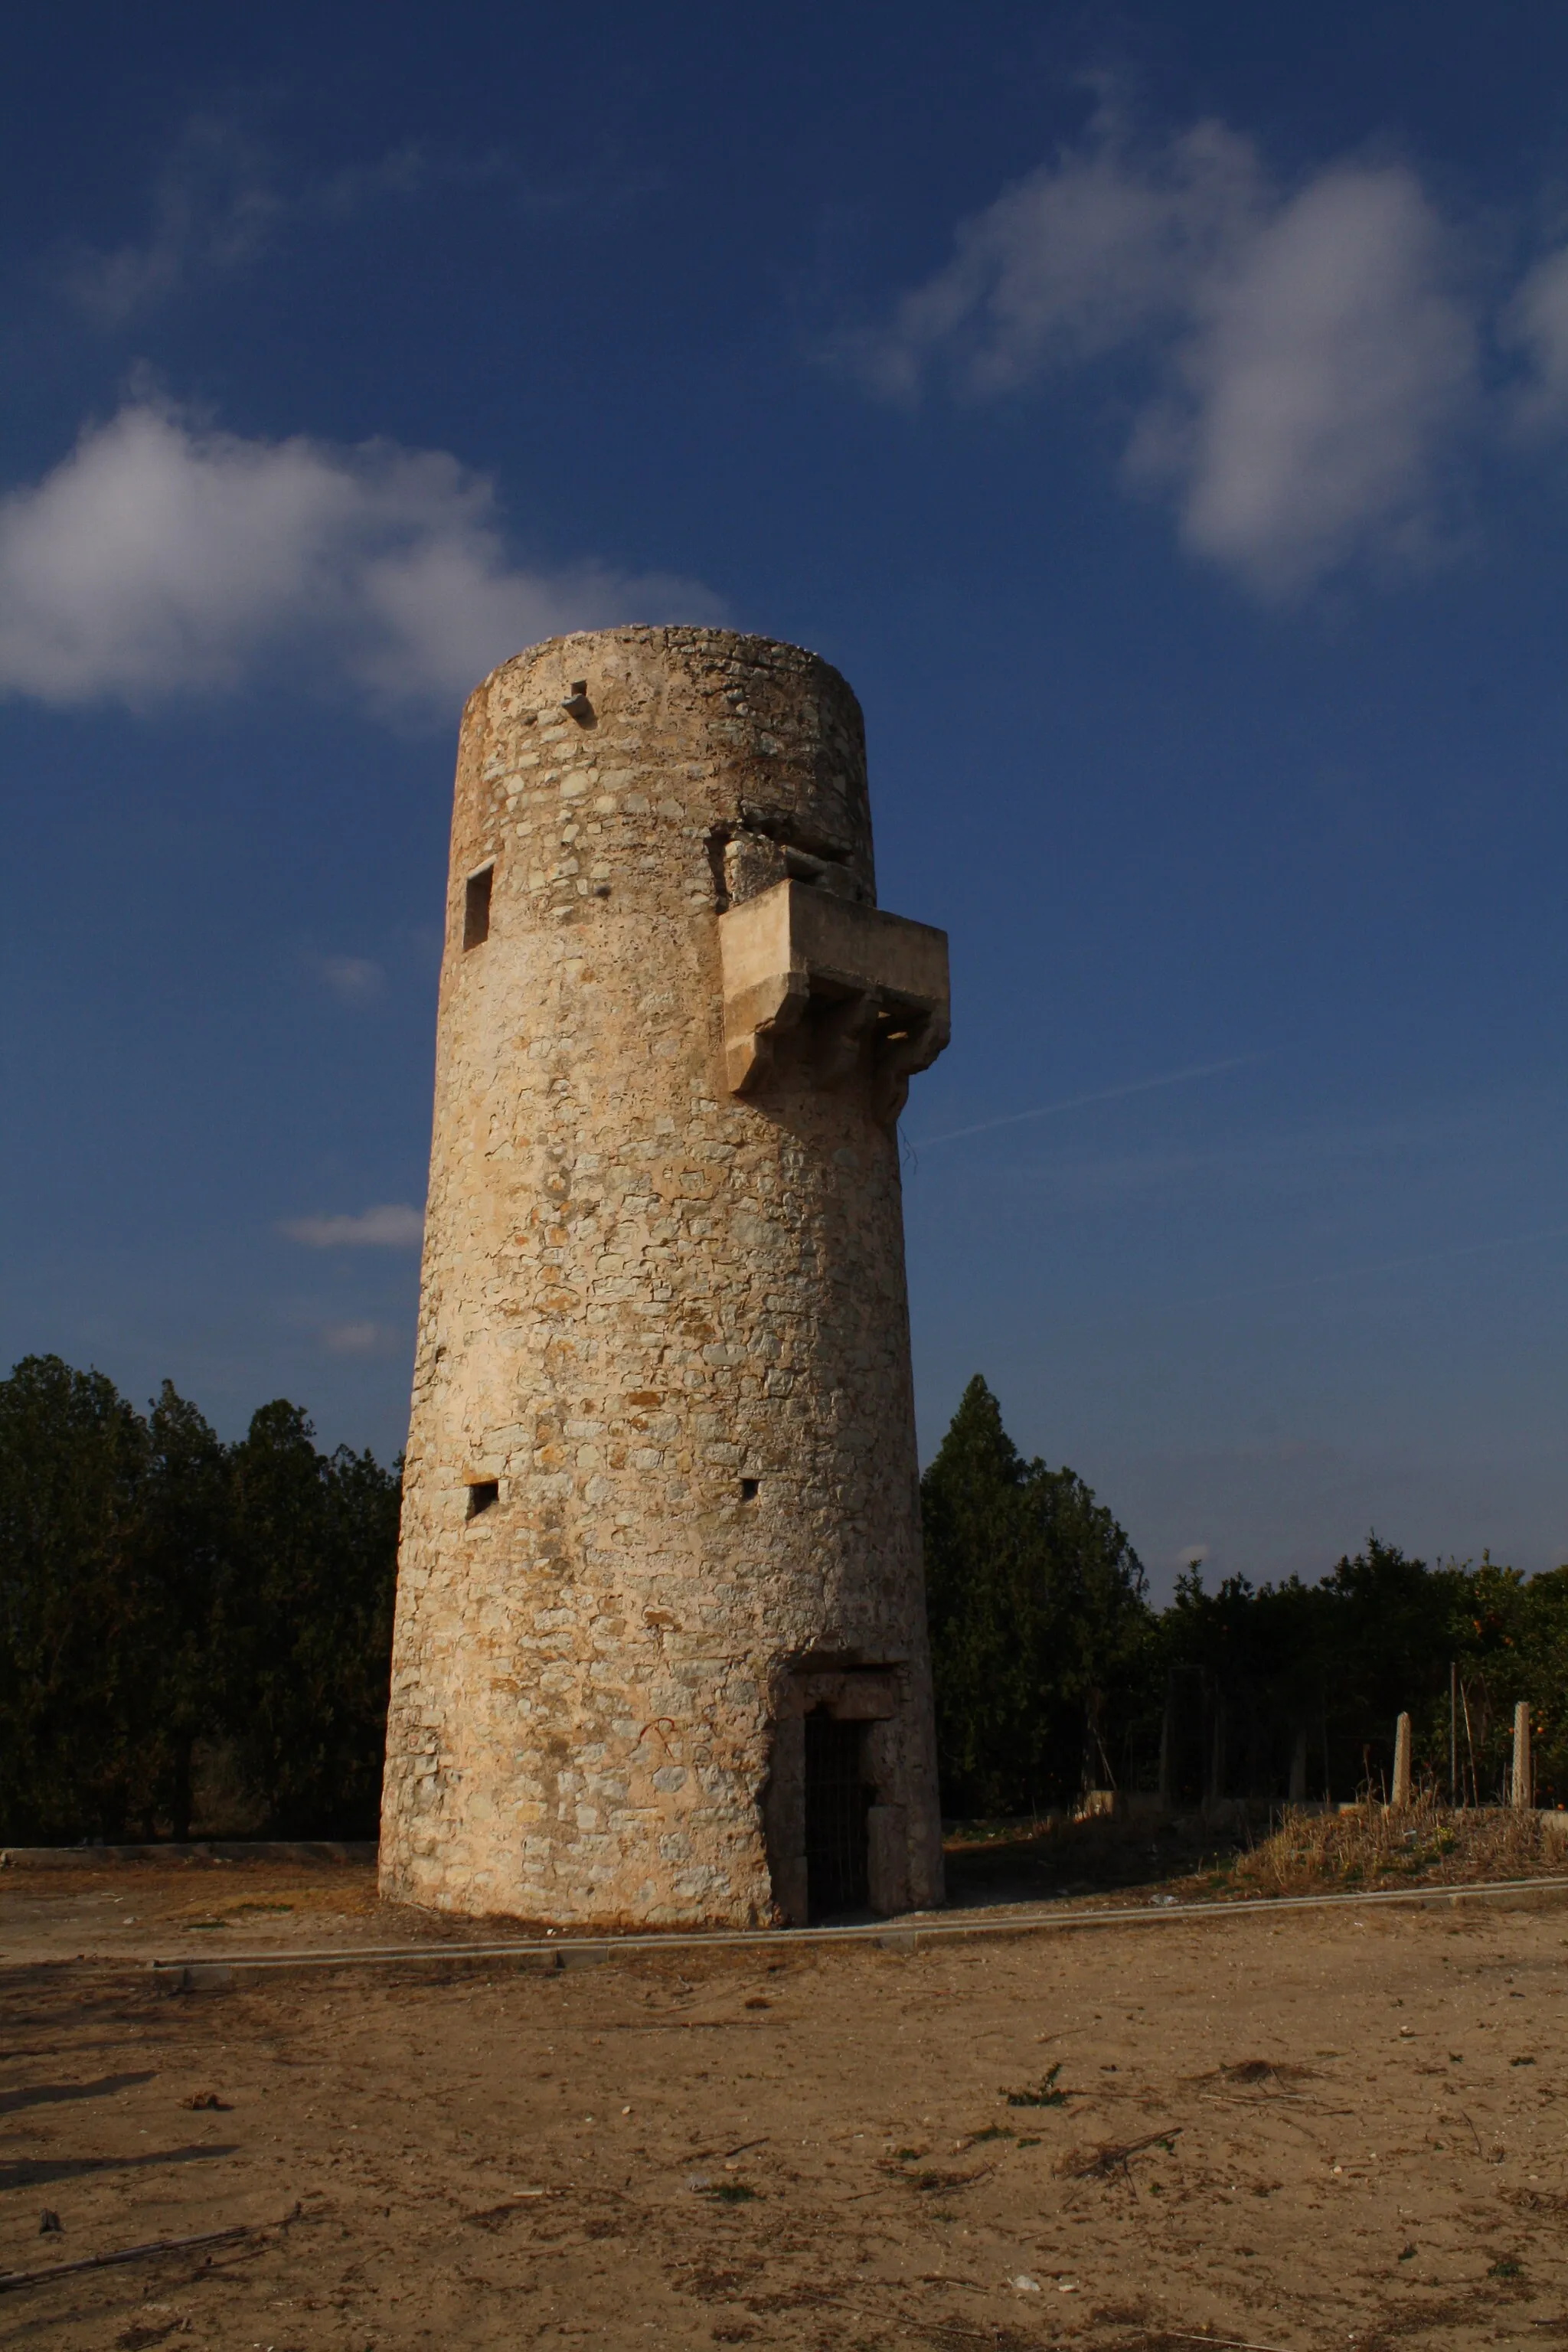 Photo showing: Tavernes de la Valldigna's watchtower, also known as Torre de guaita or Torre de la Vall. It is a registered cultural monument with id number: R-I-51-0010817.